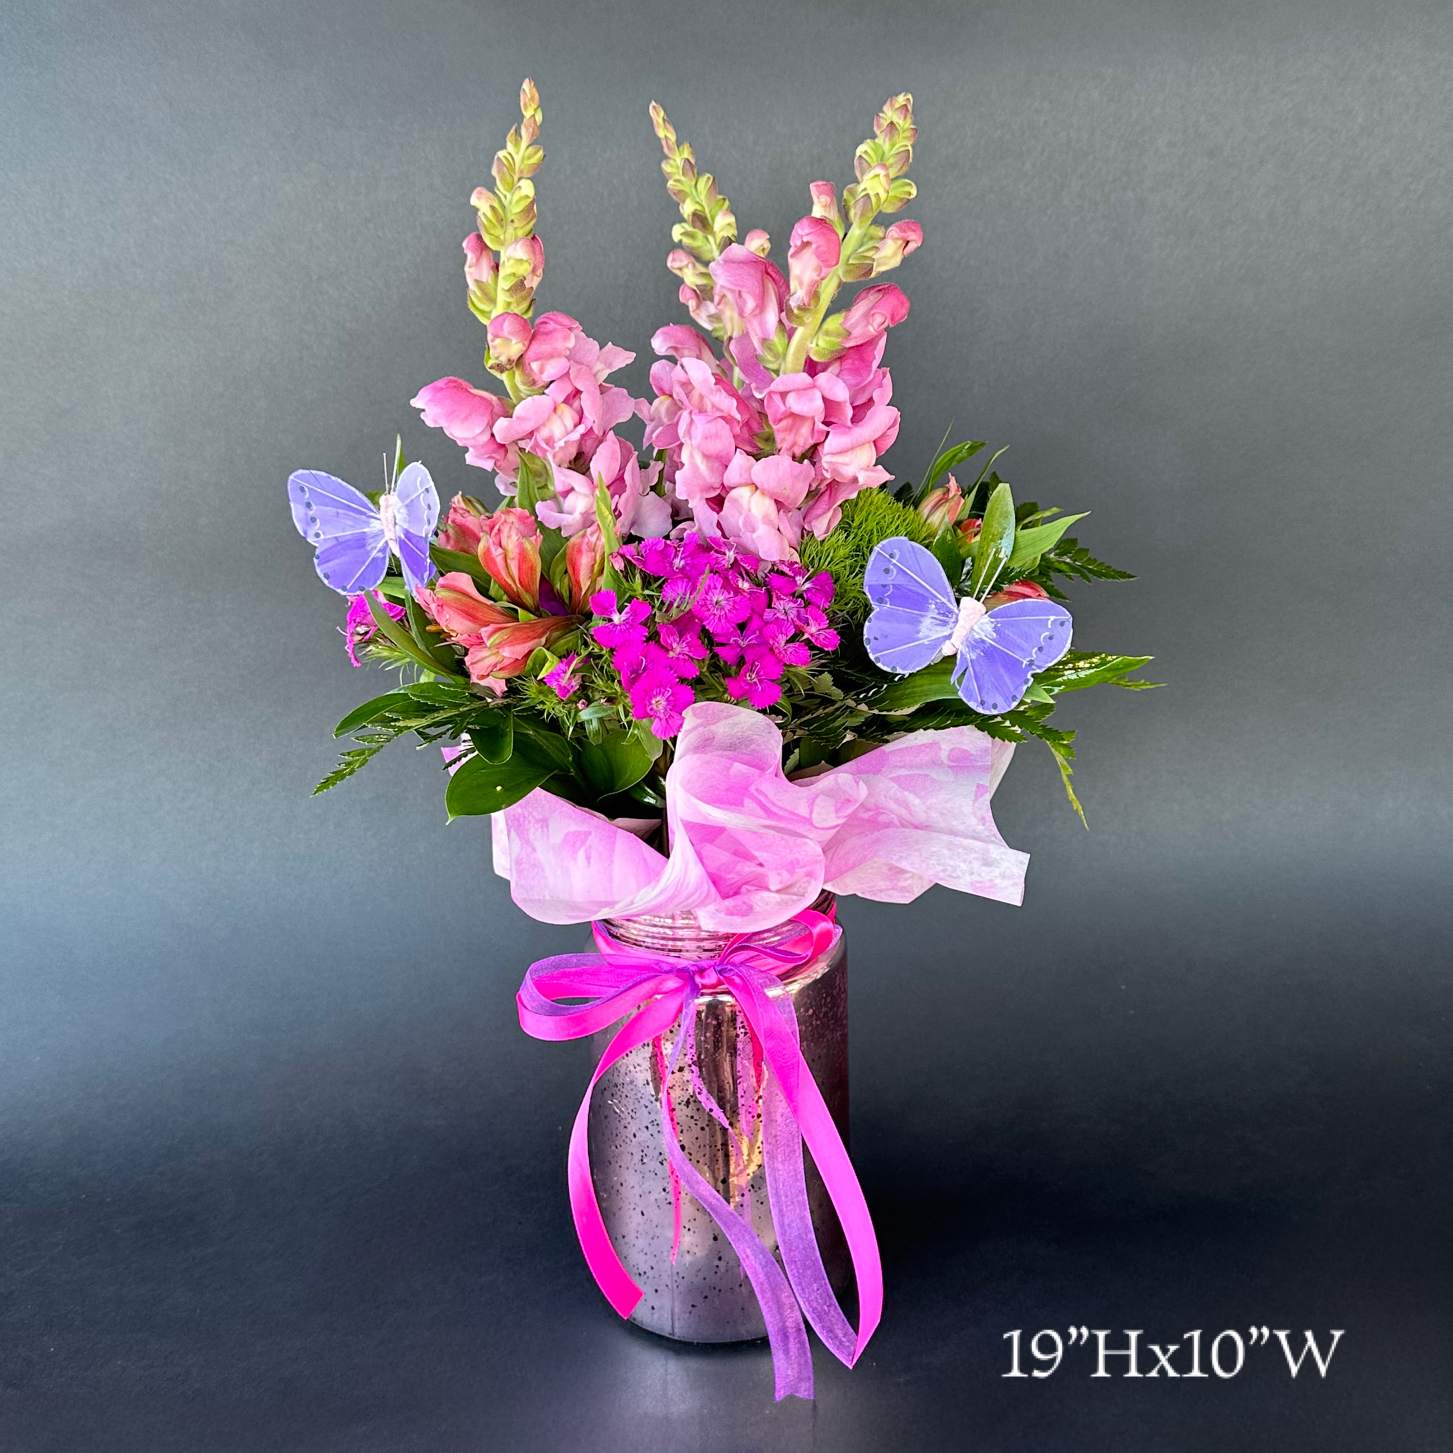 Butterfly Garden - What's a &quot;Butterfly Garden&quot; without butterflies? Surprise that special someone with this beautiful arrangement! 